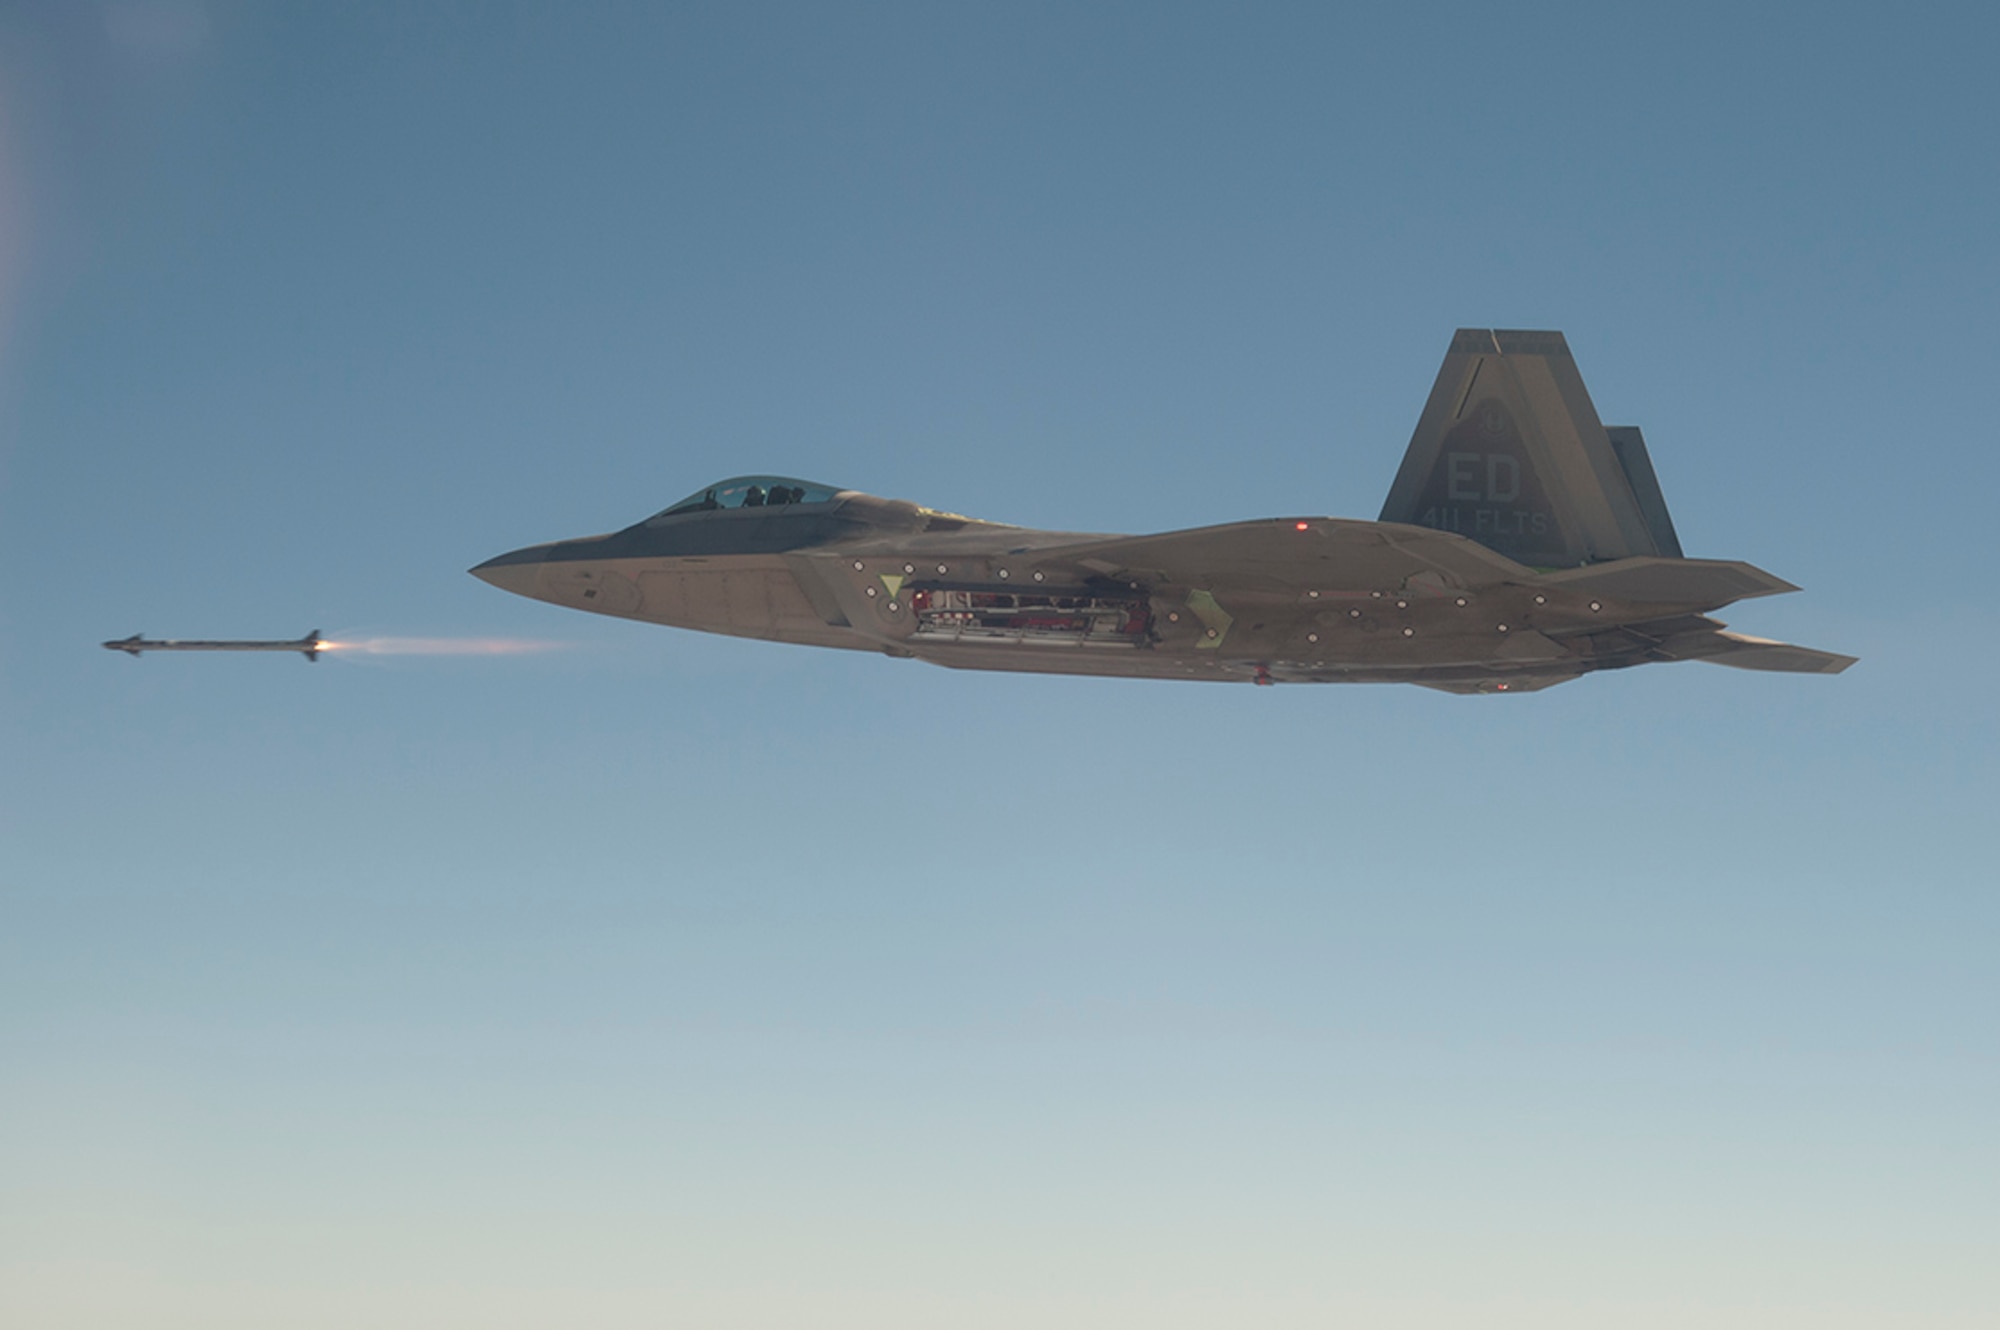 The first guided launch of the AIM-9X from an F-22 Raptor was Feb. 26, 2015, by Maj. Christopher Guarente, 411th FLTS assistant director of operations and F-22 test pilot. The AIM-9X is an advanced infrared missile and the newest of the Sidewinder family of short-range air-to-air missiles carried on a wide range of fighter jets. (Photo by David Henry/Lockheed Martin)
